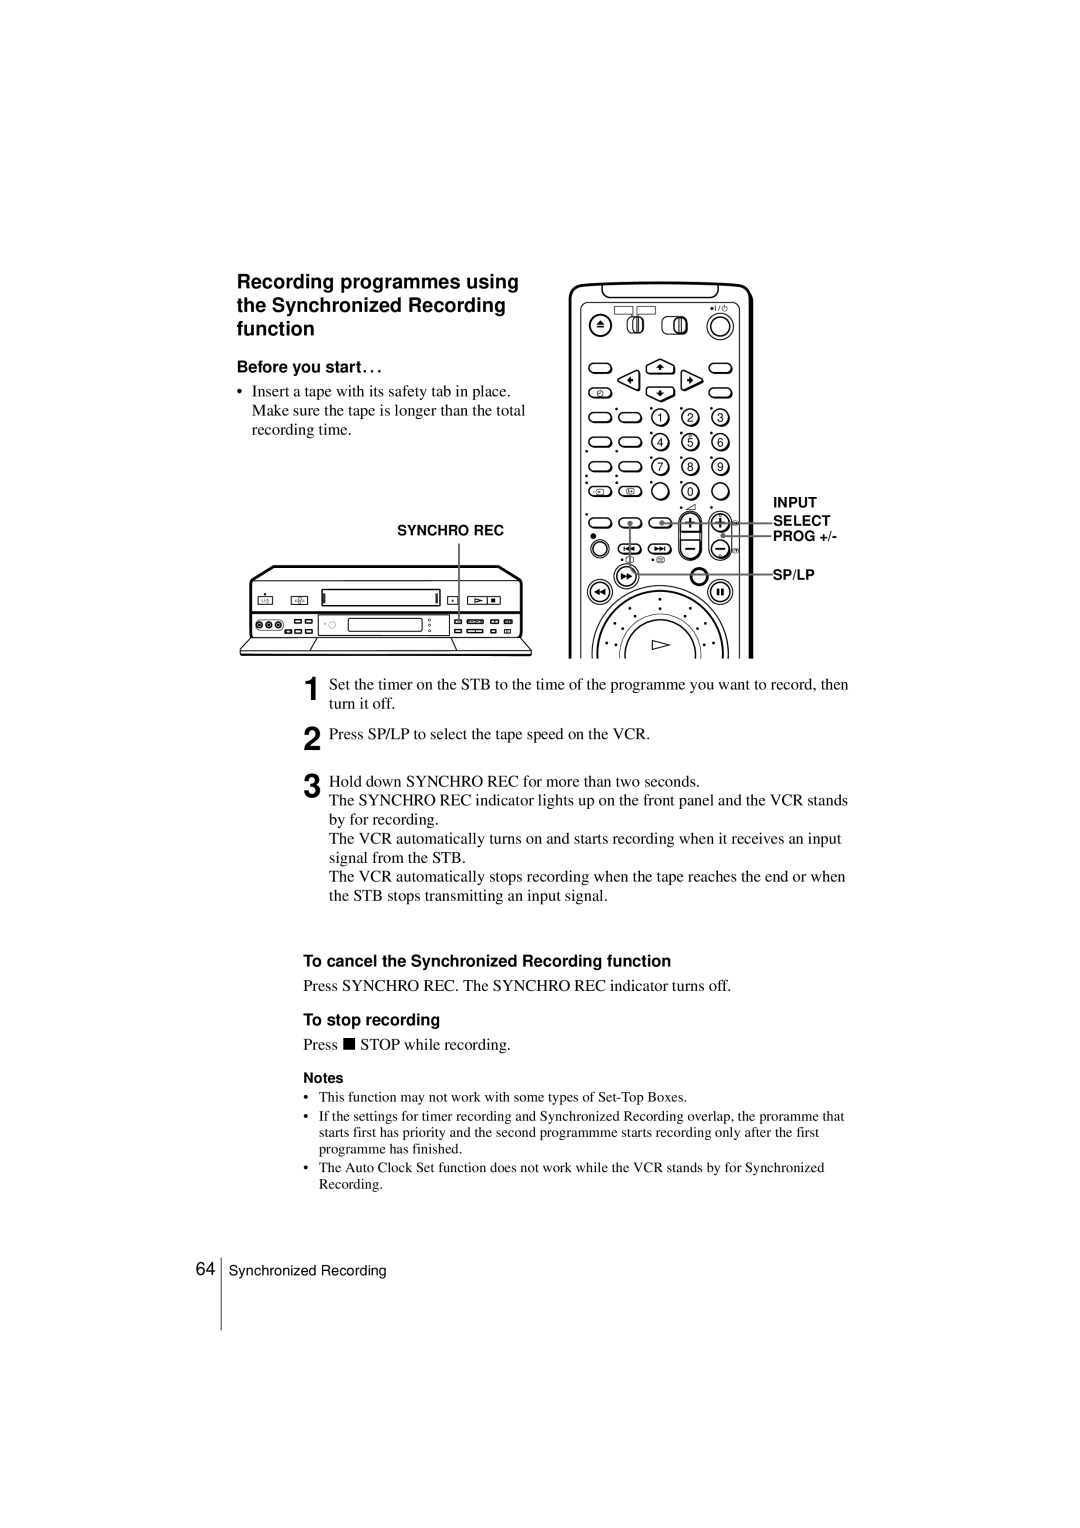 Sony SLV-SF990G manual Recording programmes using the Synchronized Recording function, Before you start…, To stop recording 